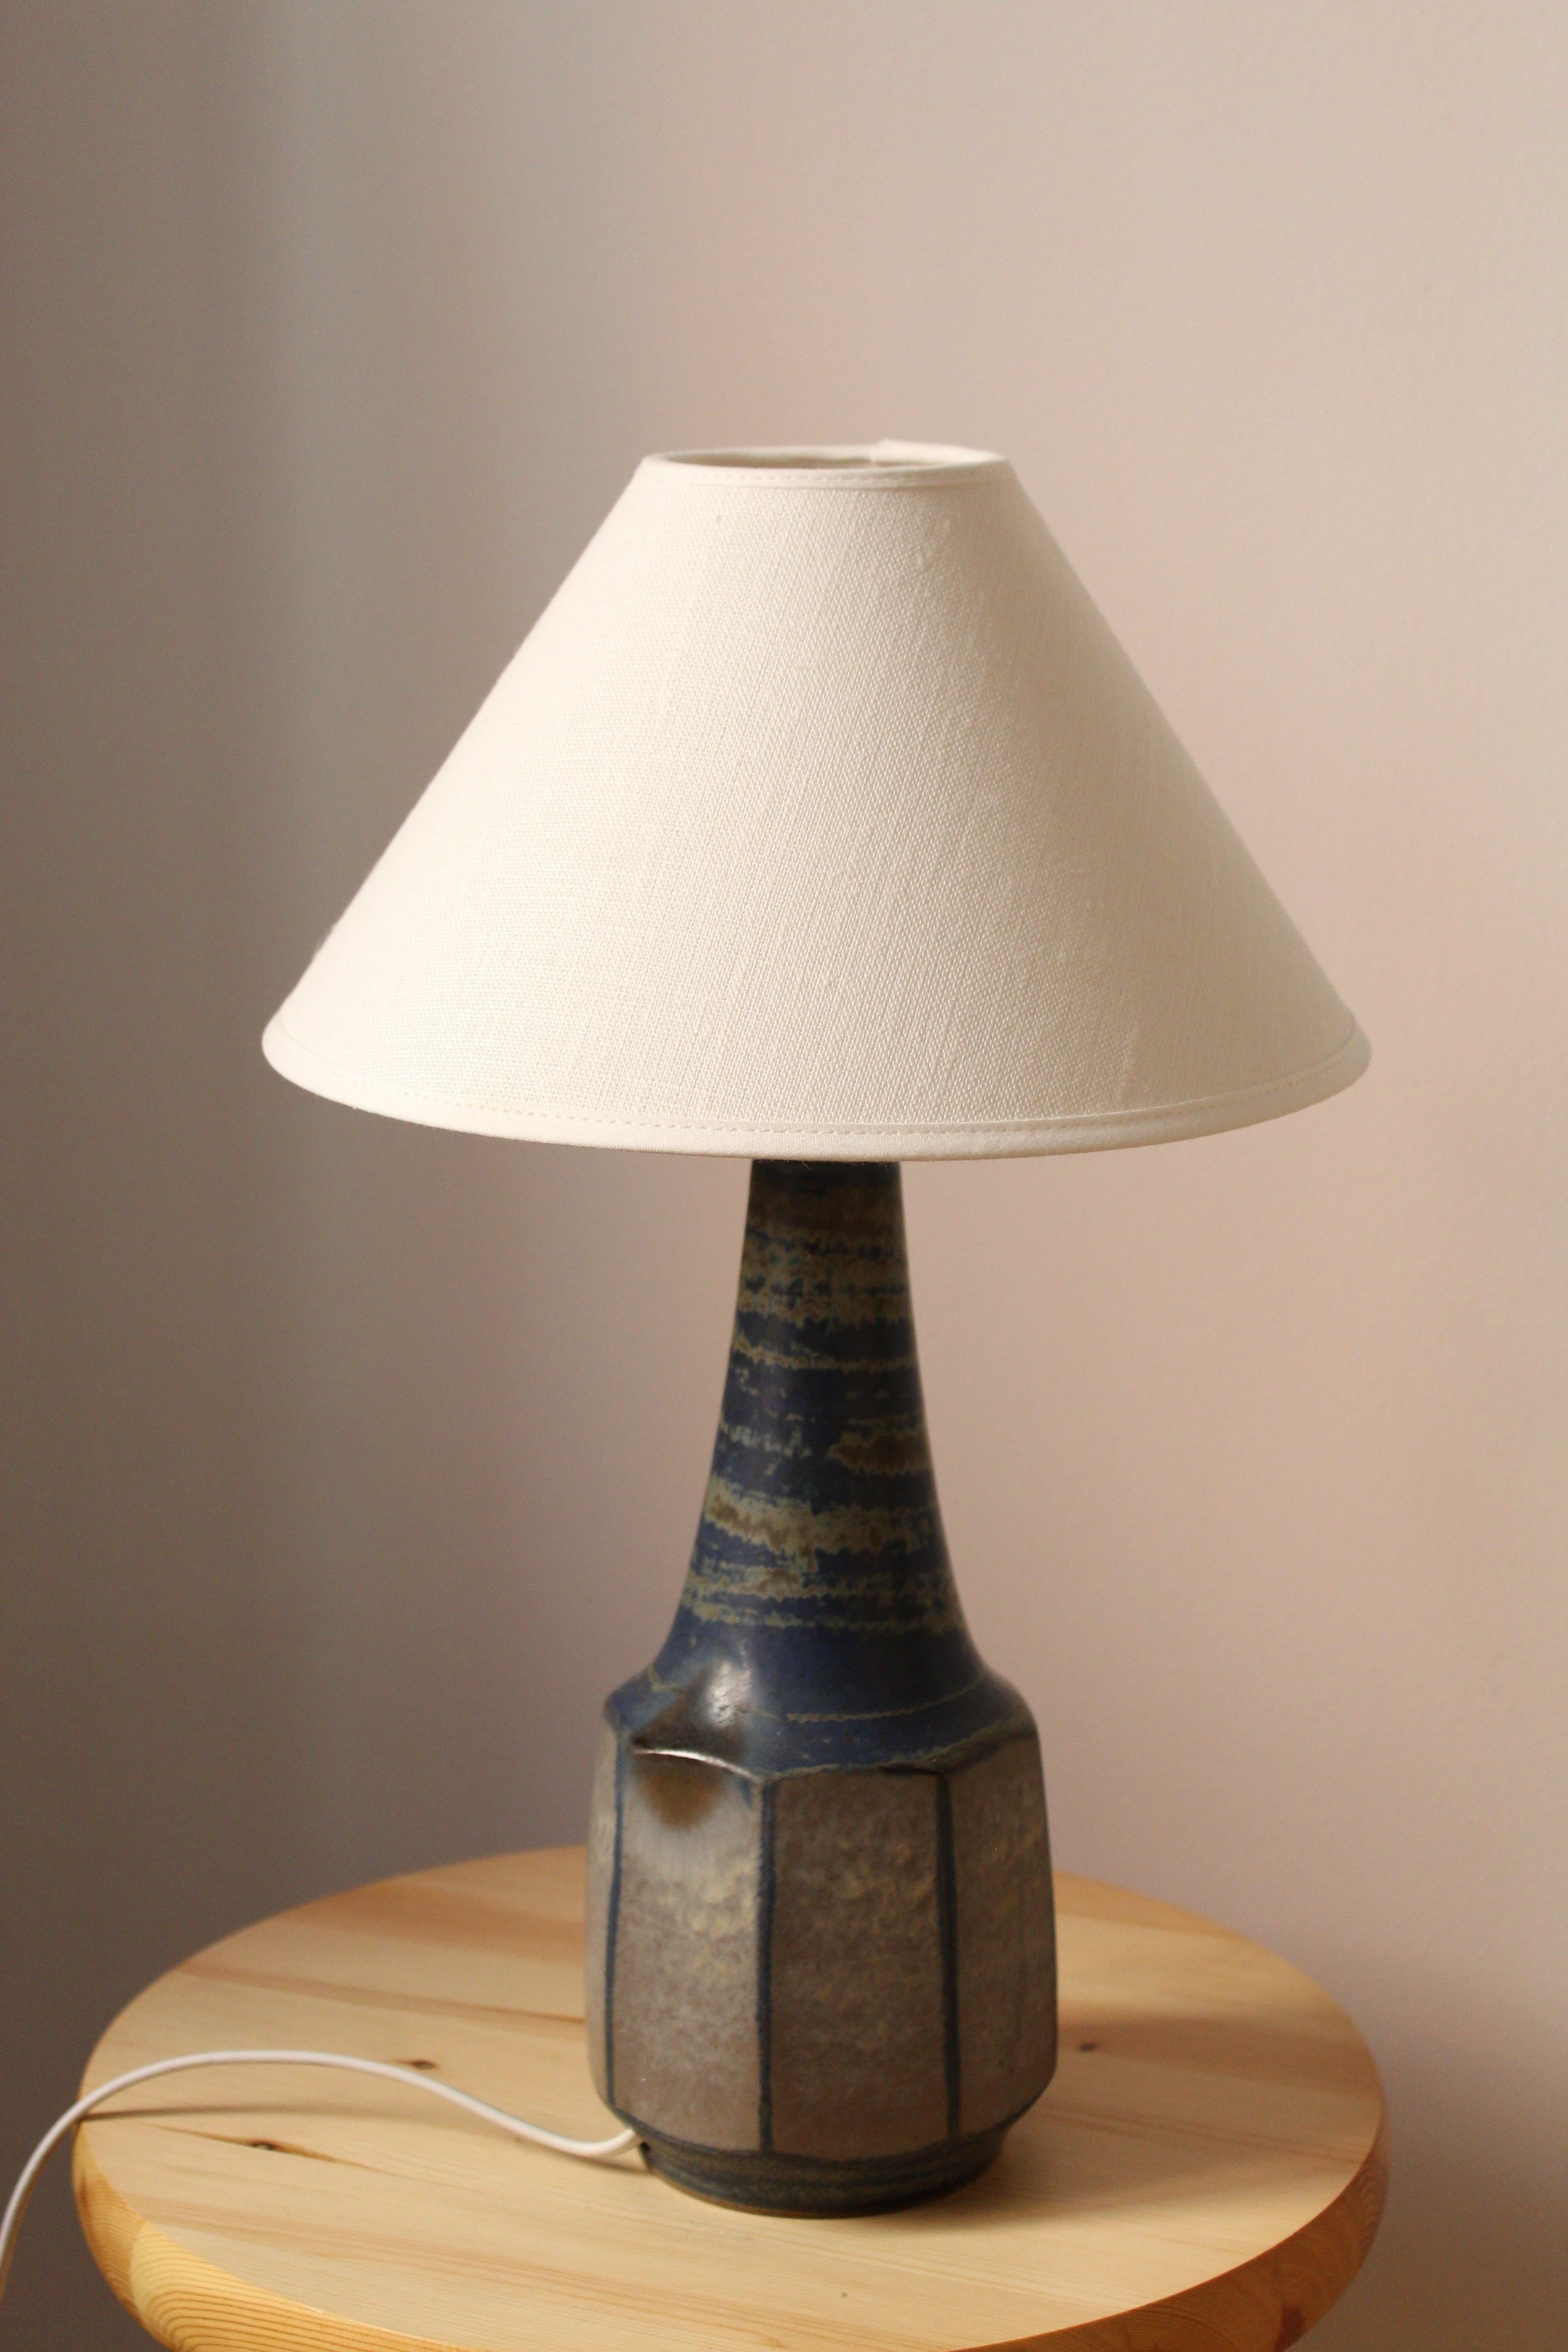 A table lamp designed by Marianne Starck produced by Michael Andersen Keramik. 

Purchase excludes lampshade. Stated measurements excluding lampshade.

Glaze features brown-green-blue colors.

Other ceramicists of the period include Axel Salto, Arne